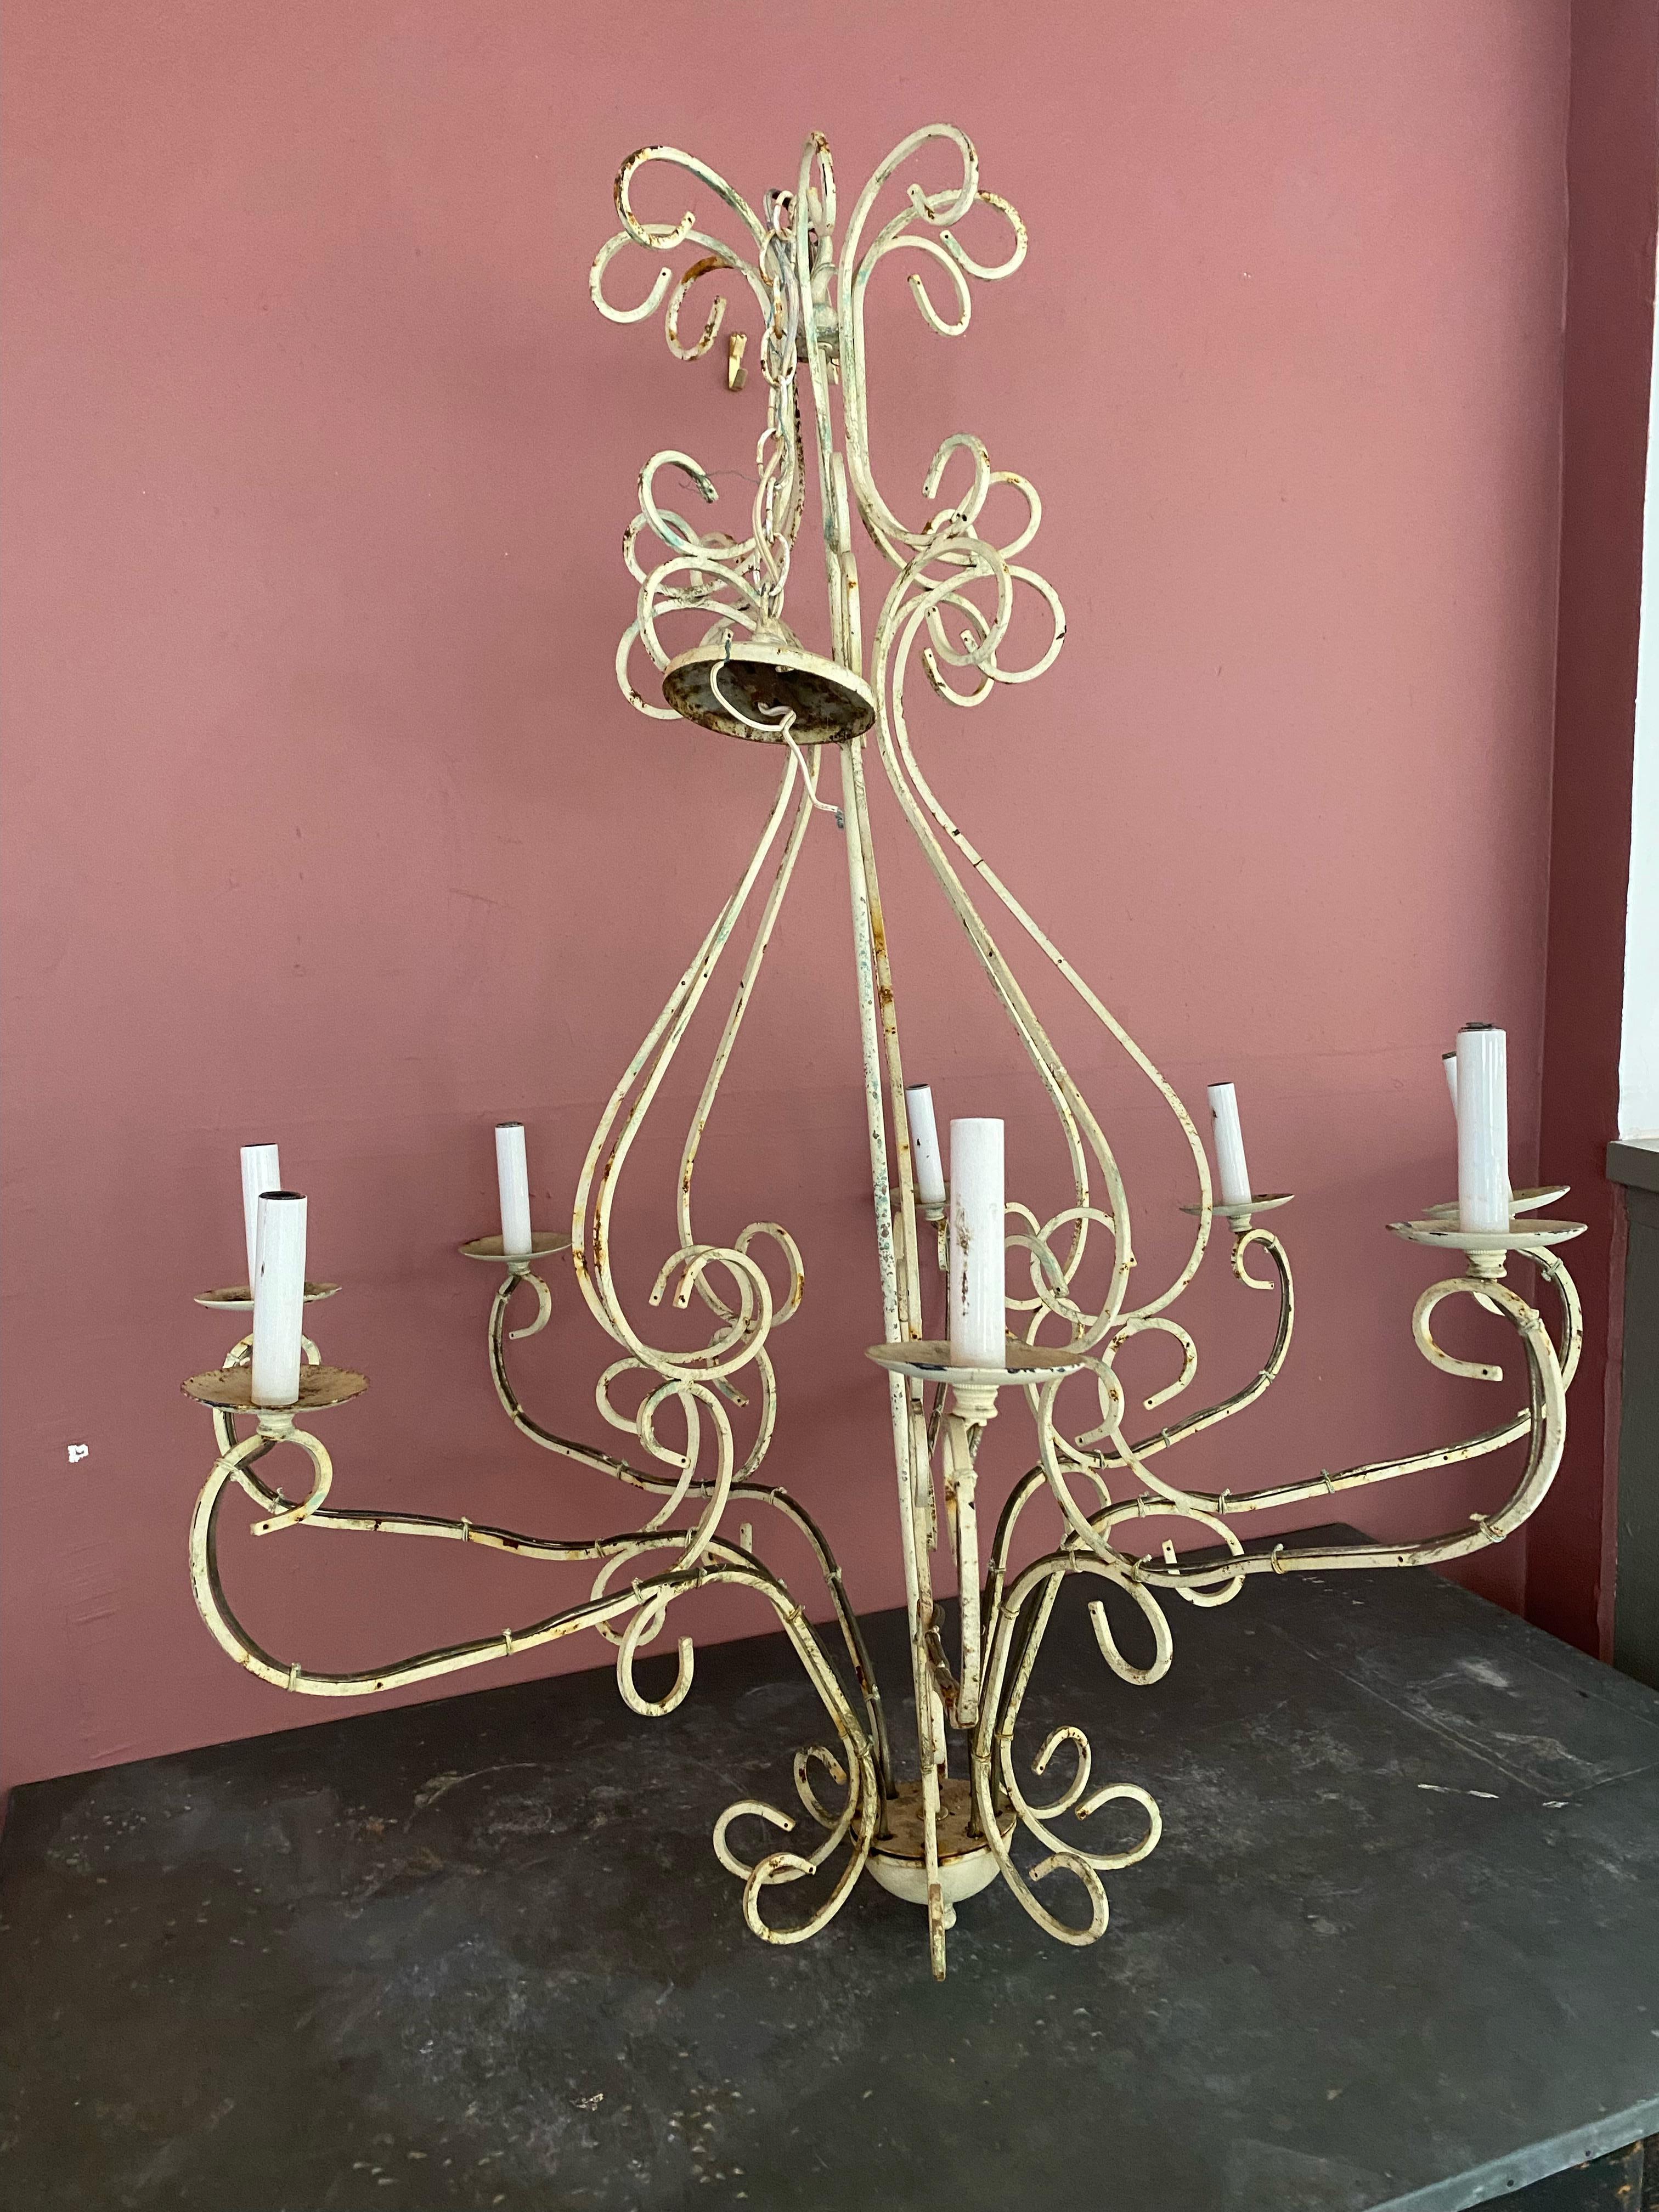 This chandelier serves as a focal point of rustic elegance, full of unique charm and character. Each intricately designed wrought iron detail evokes a sense of romance, capturing the essence of French provincial style. Eight lilypad candlestick